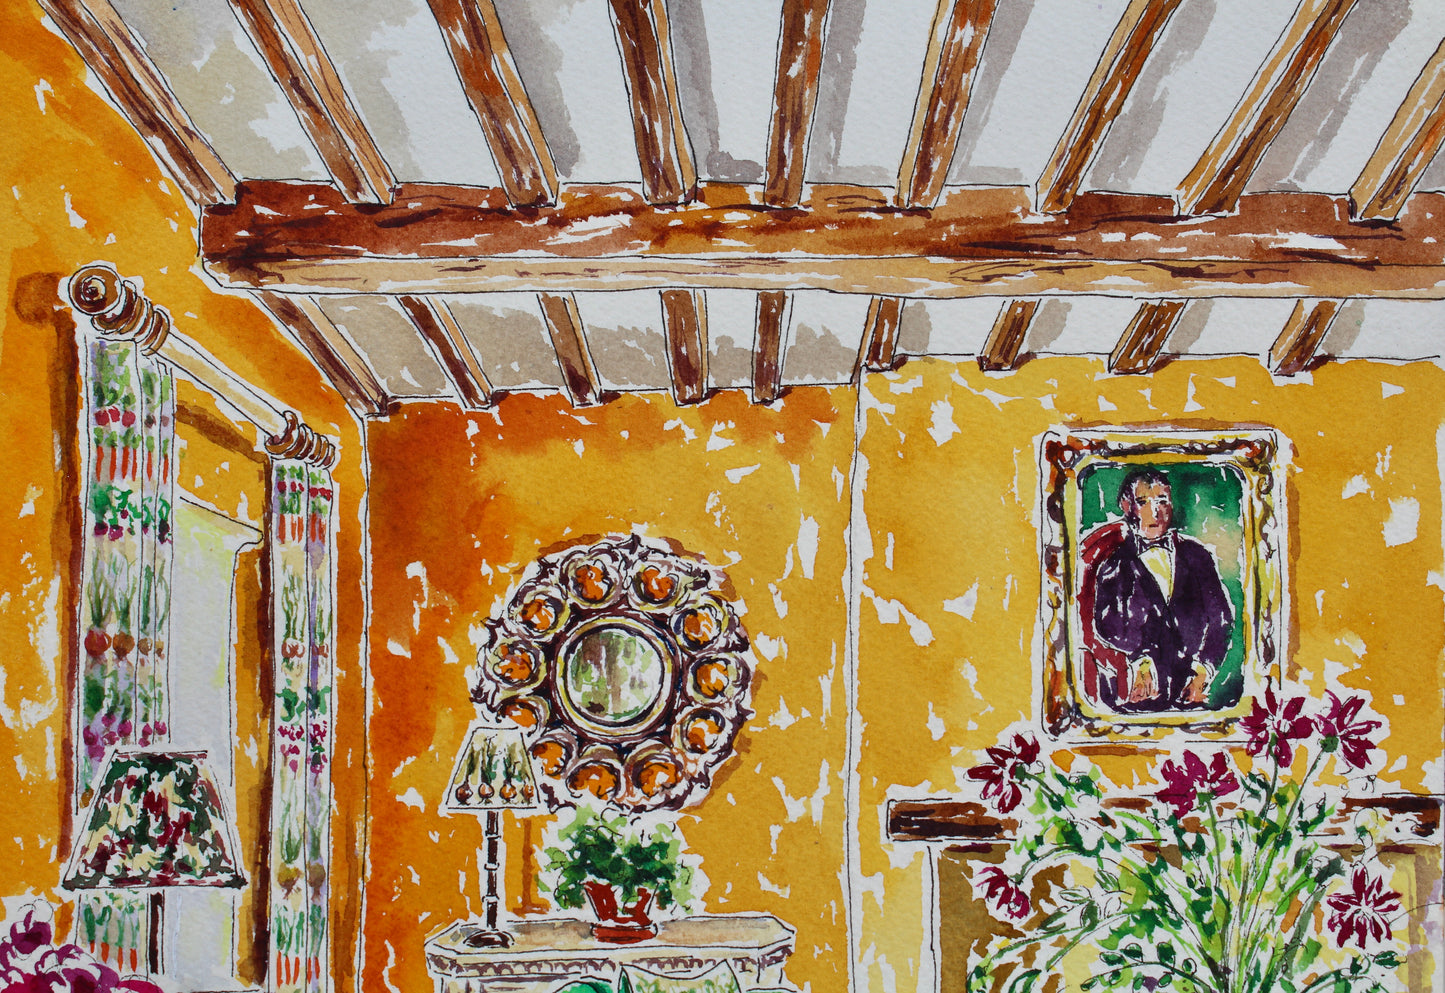 Cat's In A Cottage With A Silver Spoon, An Original Watercolor And Ink Painting Of An English Cottage Interior With A Calico Cat